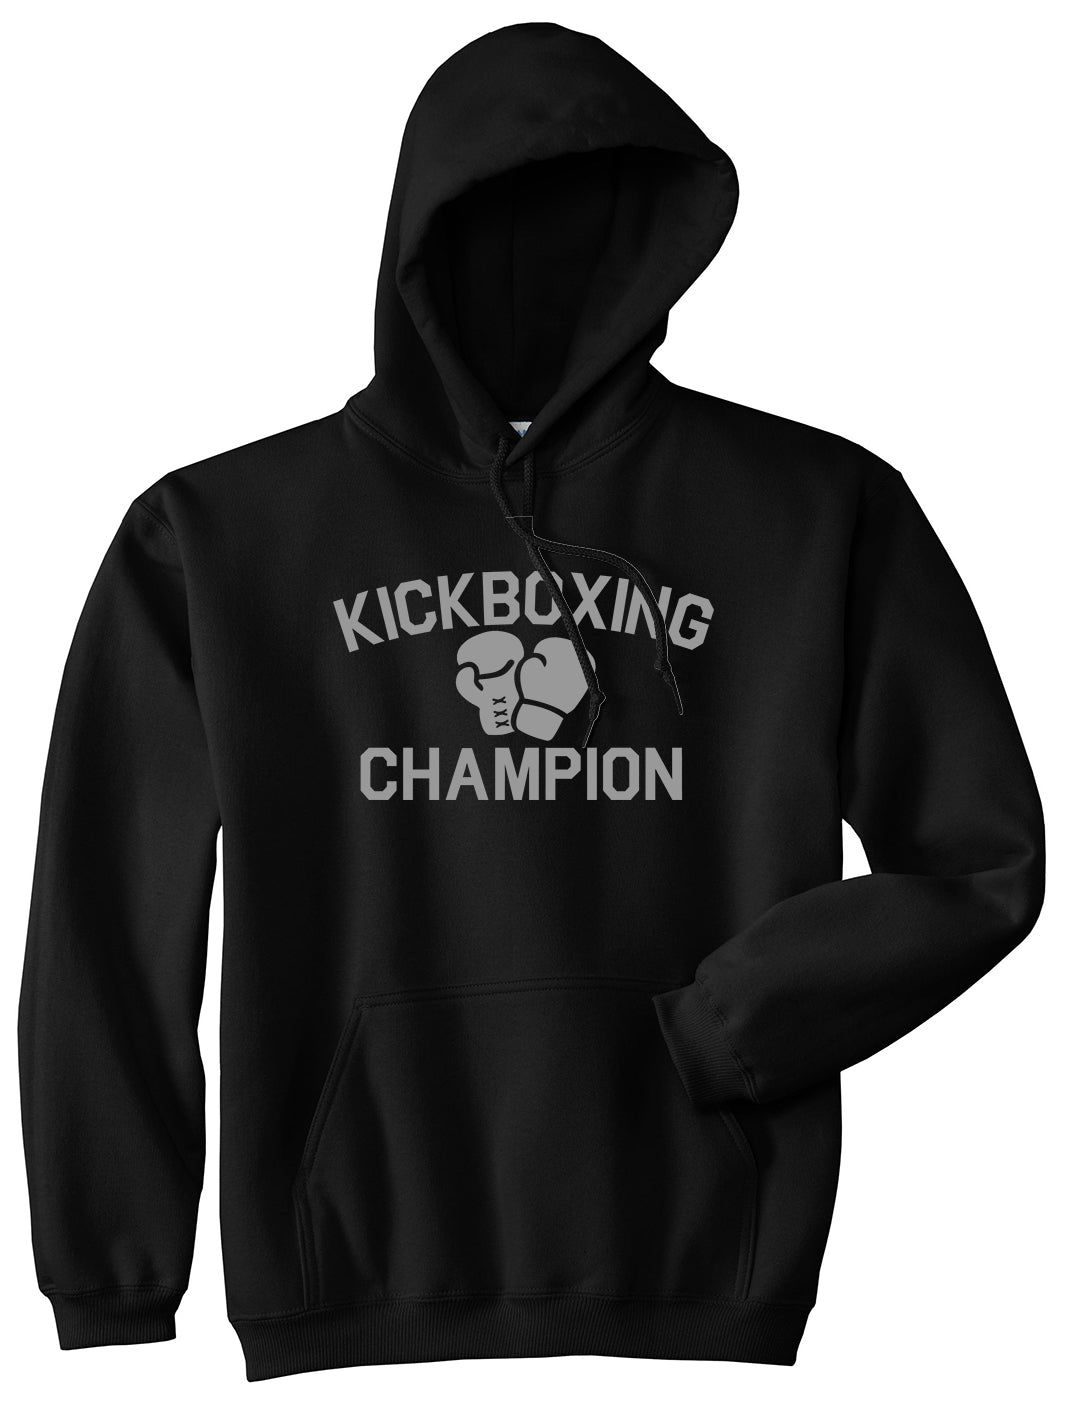 Kickboxing Champion Mens Pullover Hoodie Black by Kings Of NY